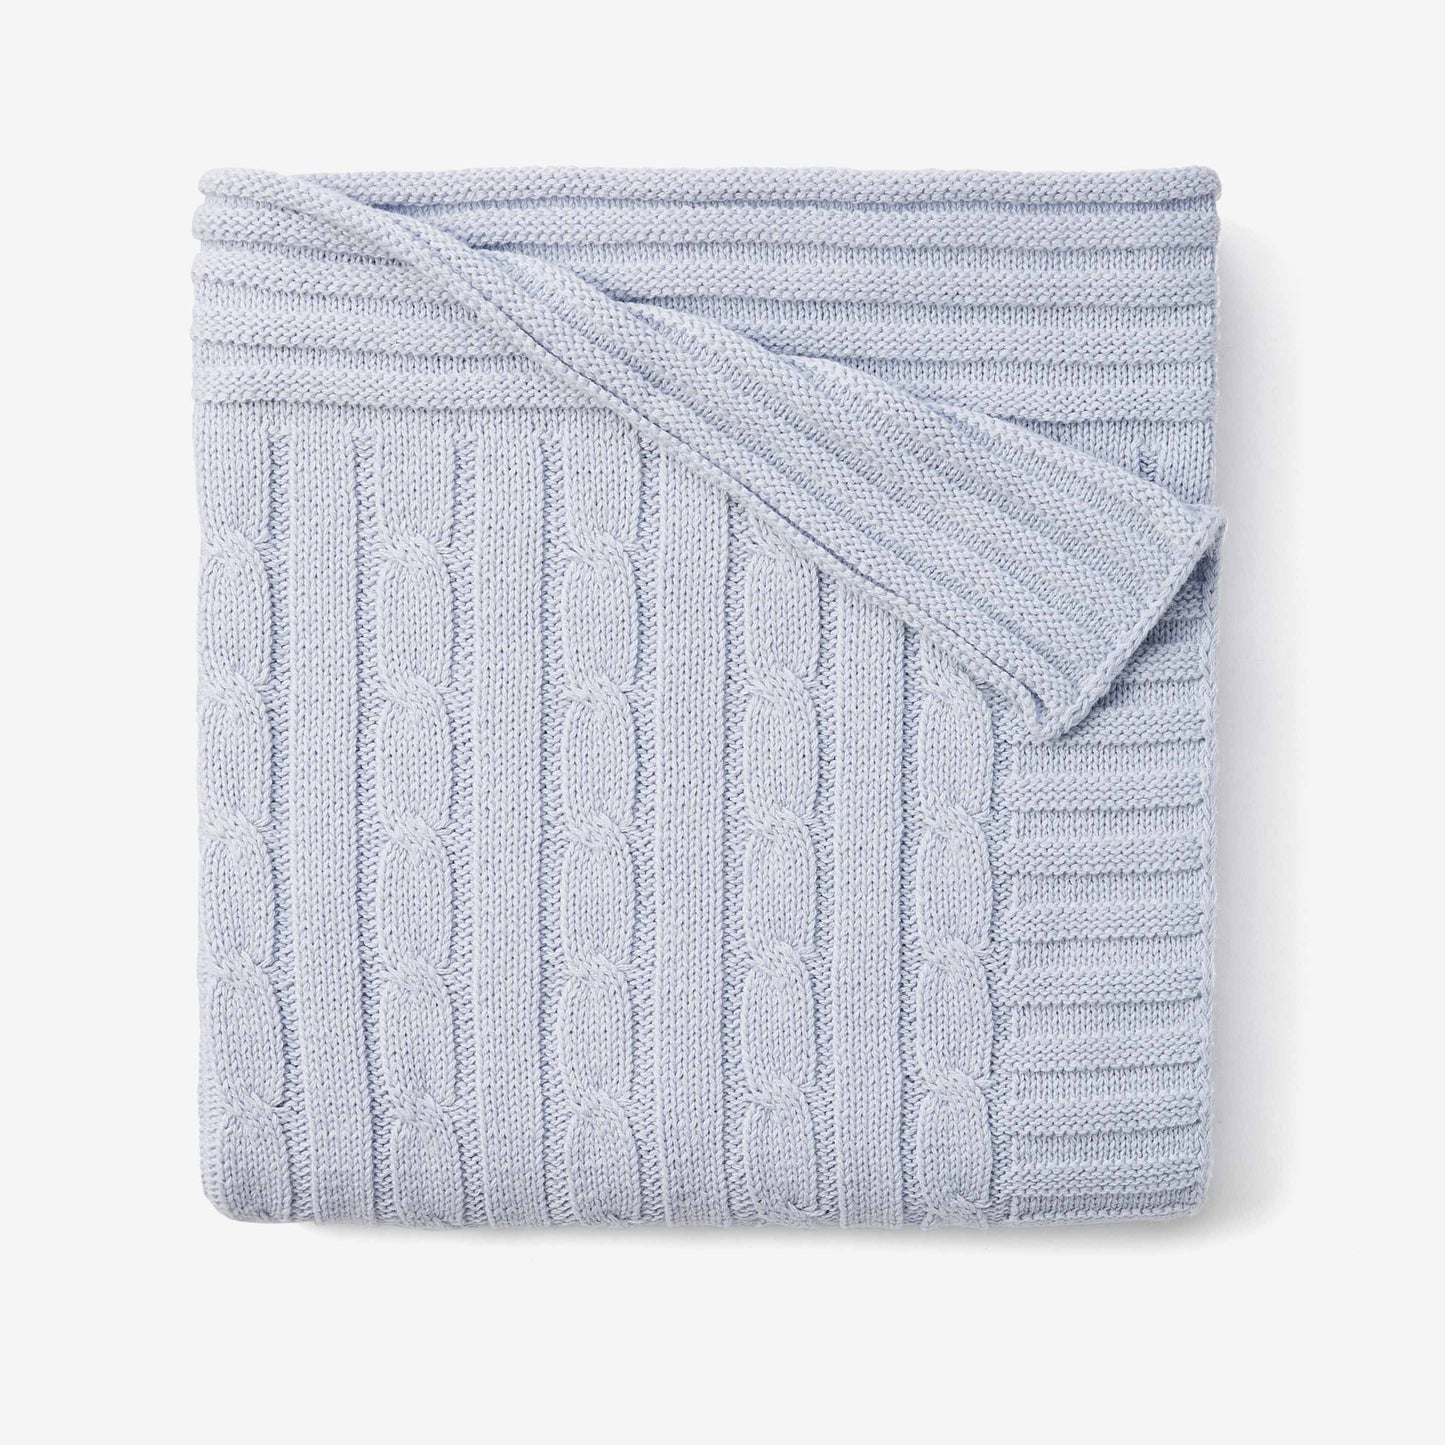 Halogen Blue Cable Knit Cotton Baby Blanket